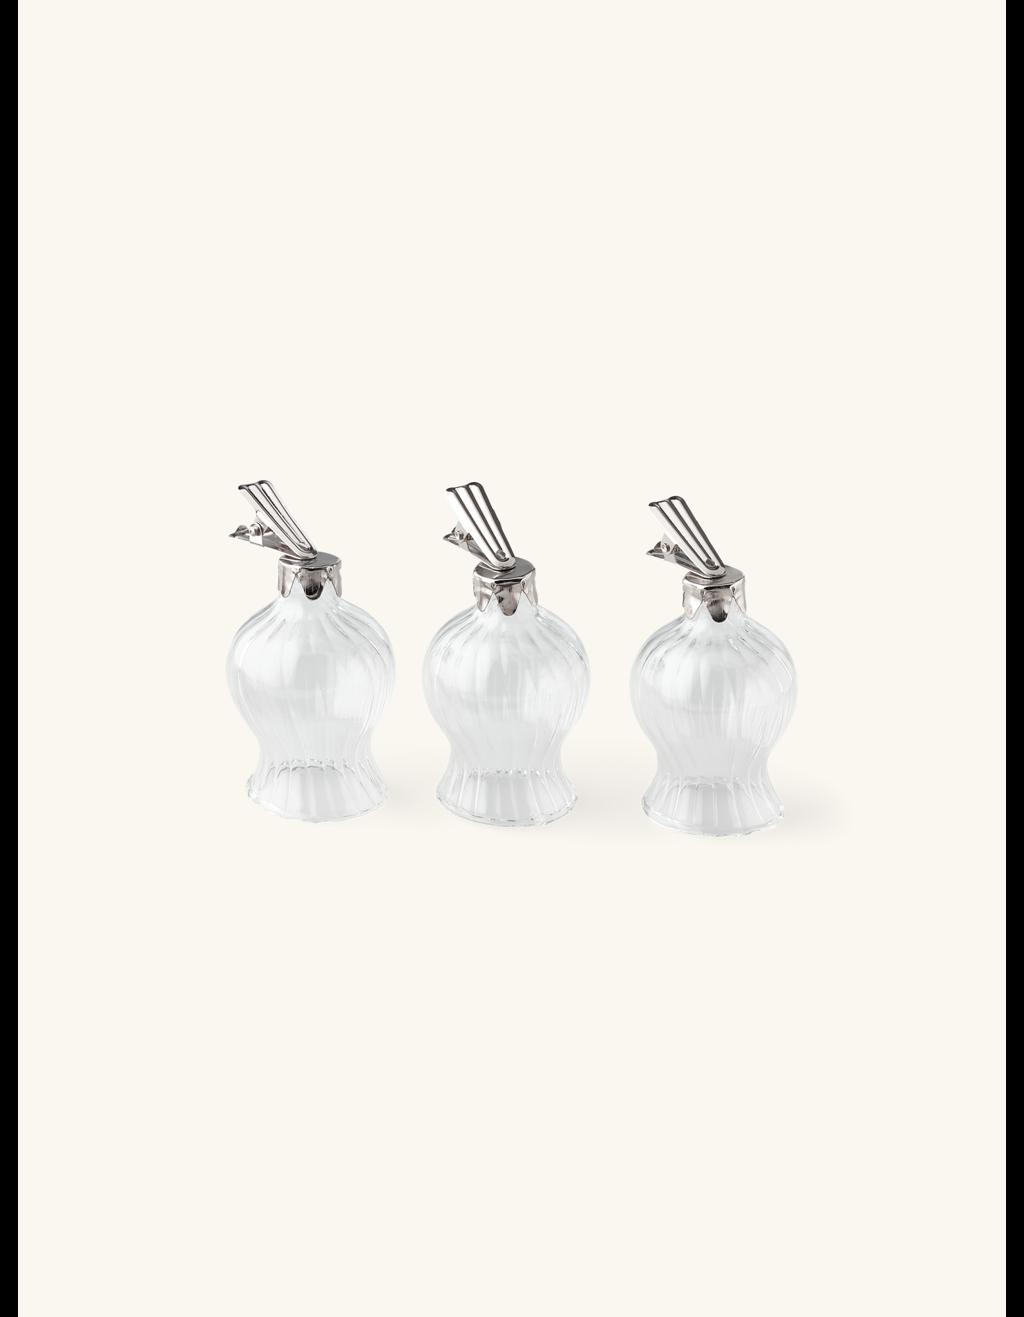 Home - Vases with clip 3-pack - Glass/iron. Ø3.5 x 6.5 cm. 3 pcs.